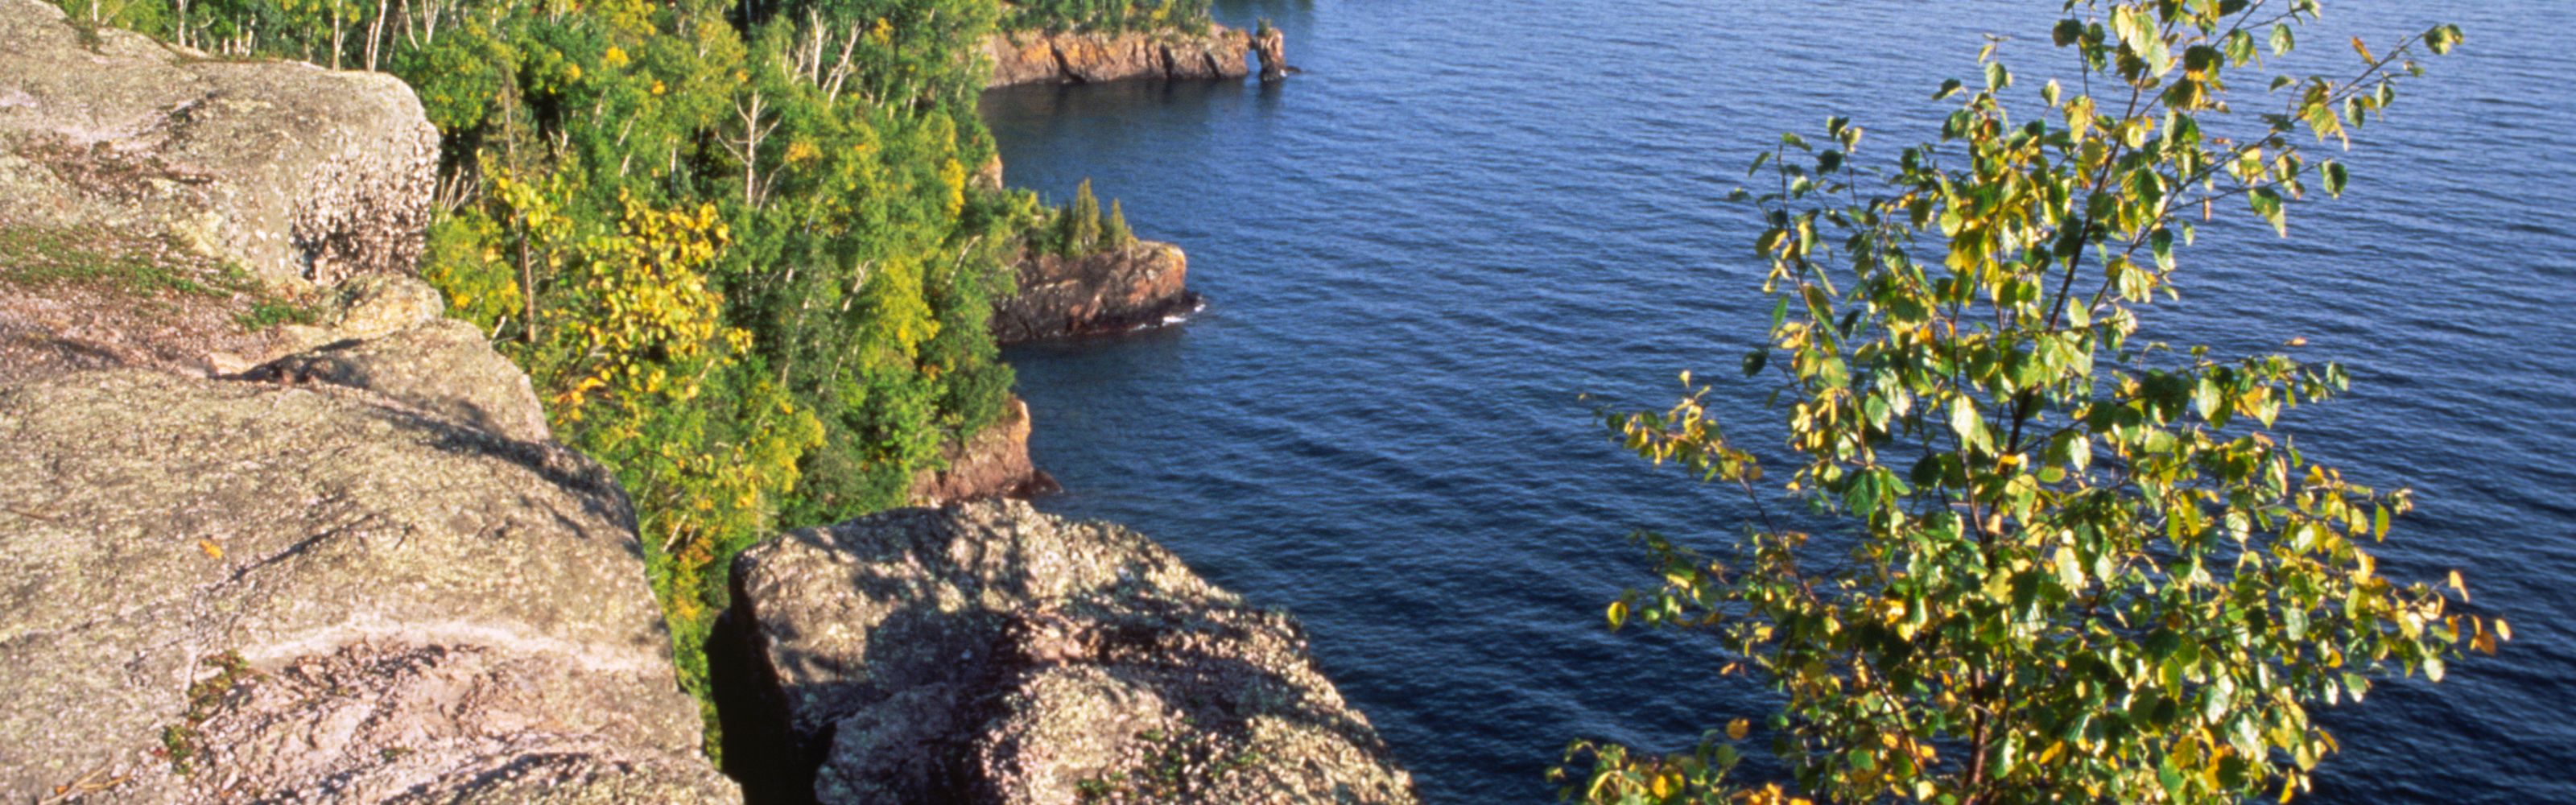 Forested cliff overlooking lake.